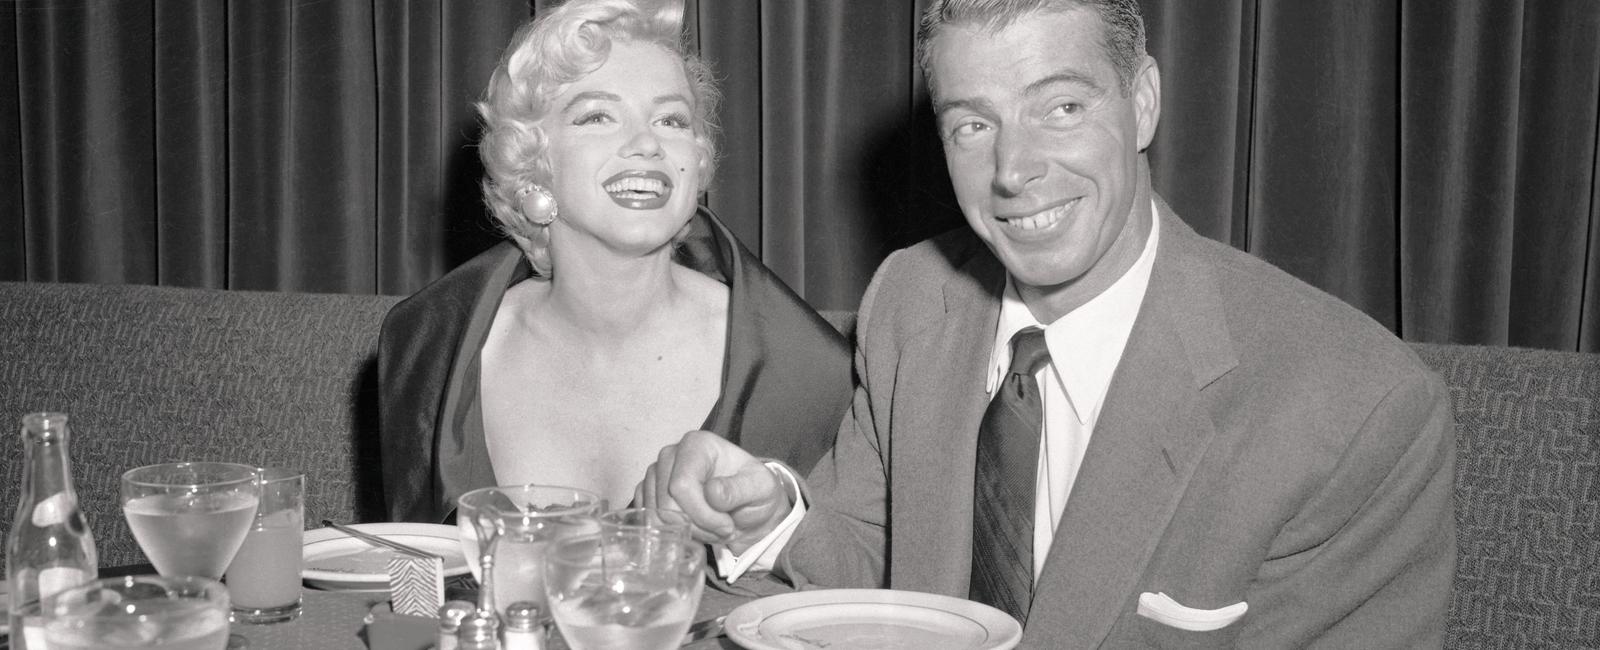 Joe dimaggio and marilyn monroe were only married for nine months but after her death he sent half a dozen roses to her grave several times a week for decades